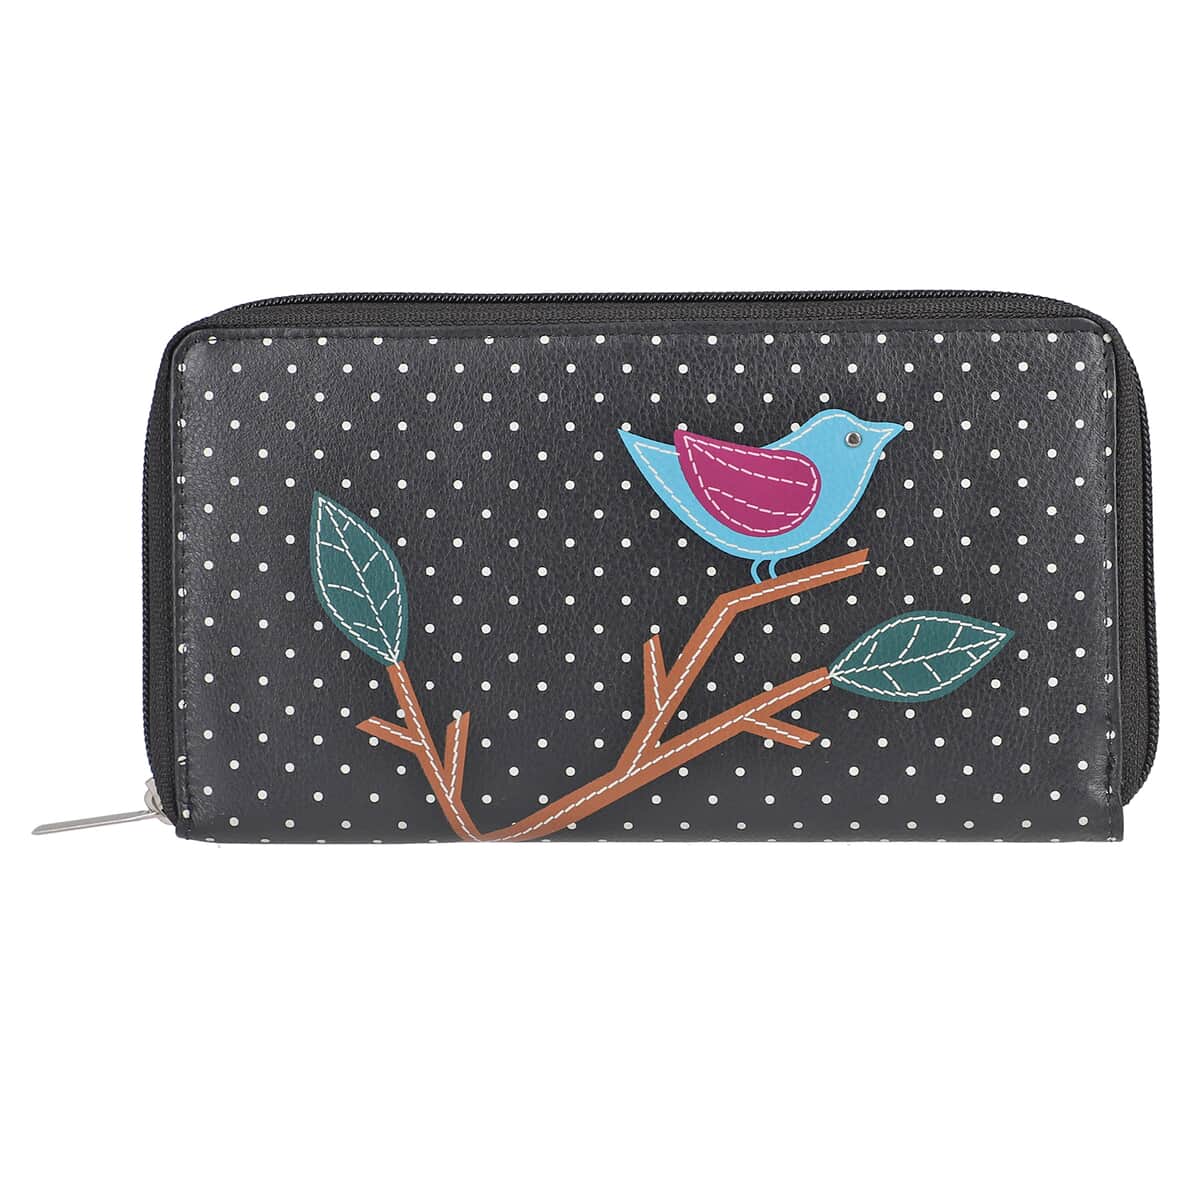 "UNION CODE -RFID Protected 100% Genuine Leather Applique Women's Wallet  THEME: Bird Sitting on Tree SIZE: 7.5(L)x4.5(W)x0.5(H) inches COLOR: black" image number 0